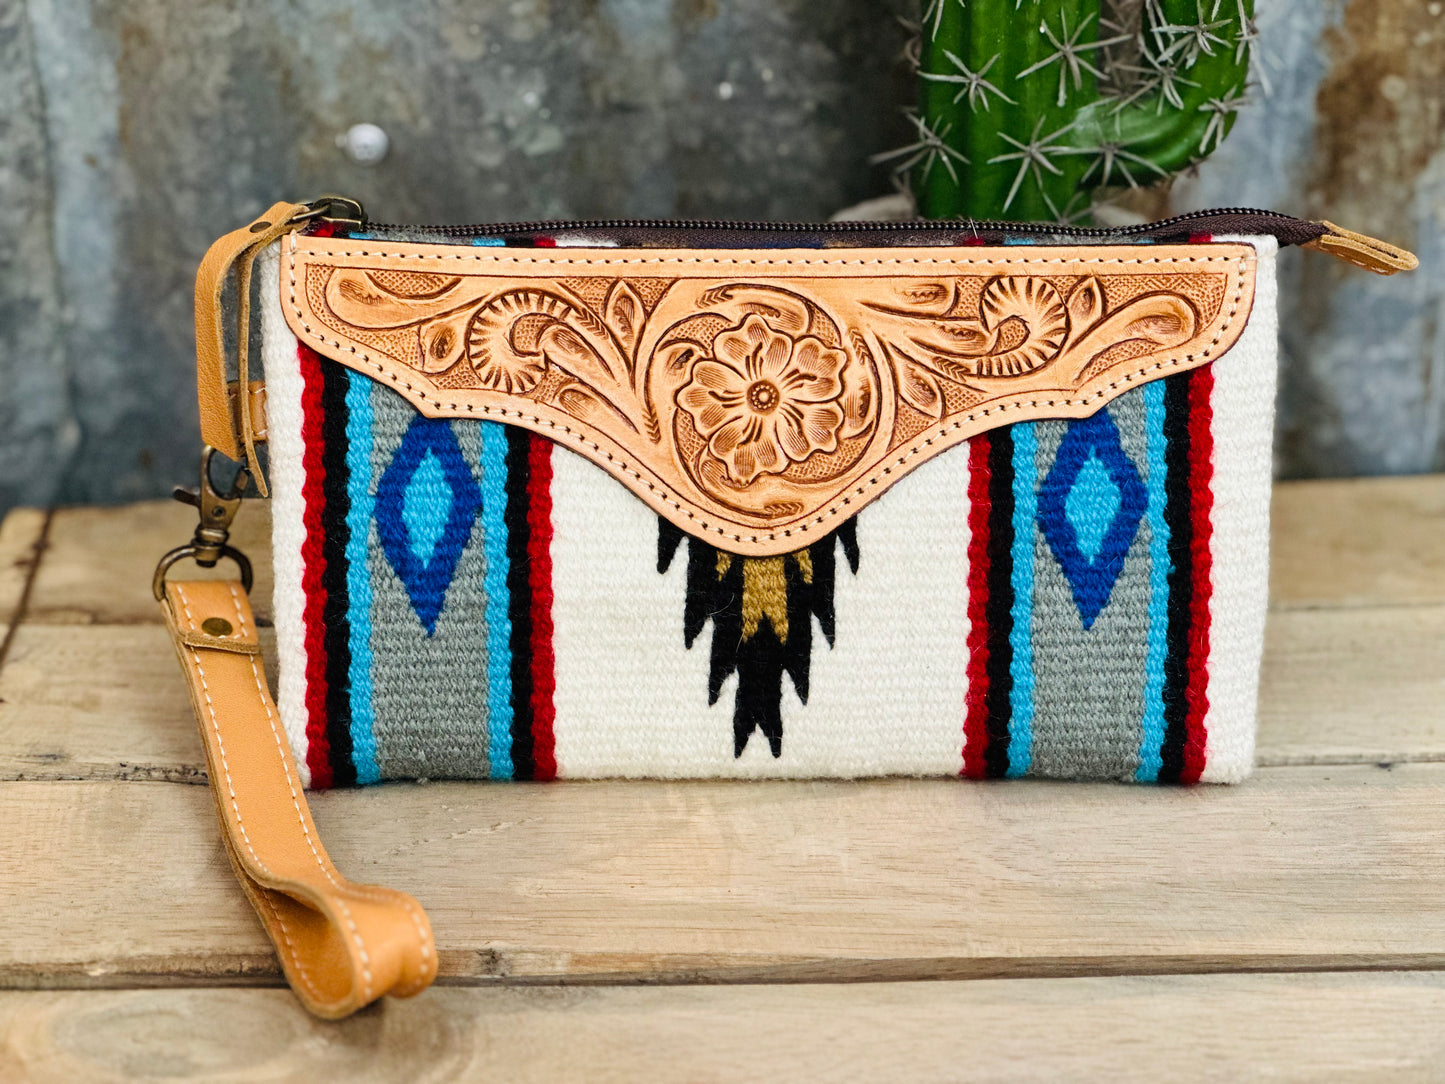 White Saddle Blanket Clutch with Brown Tooling Details